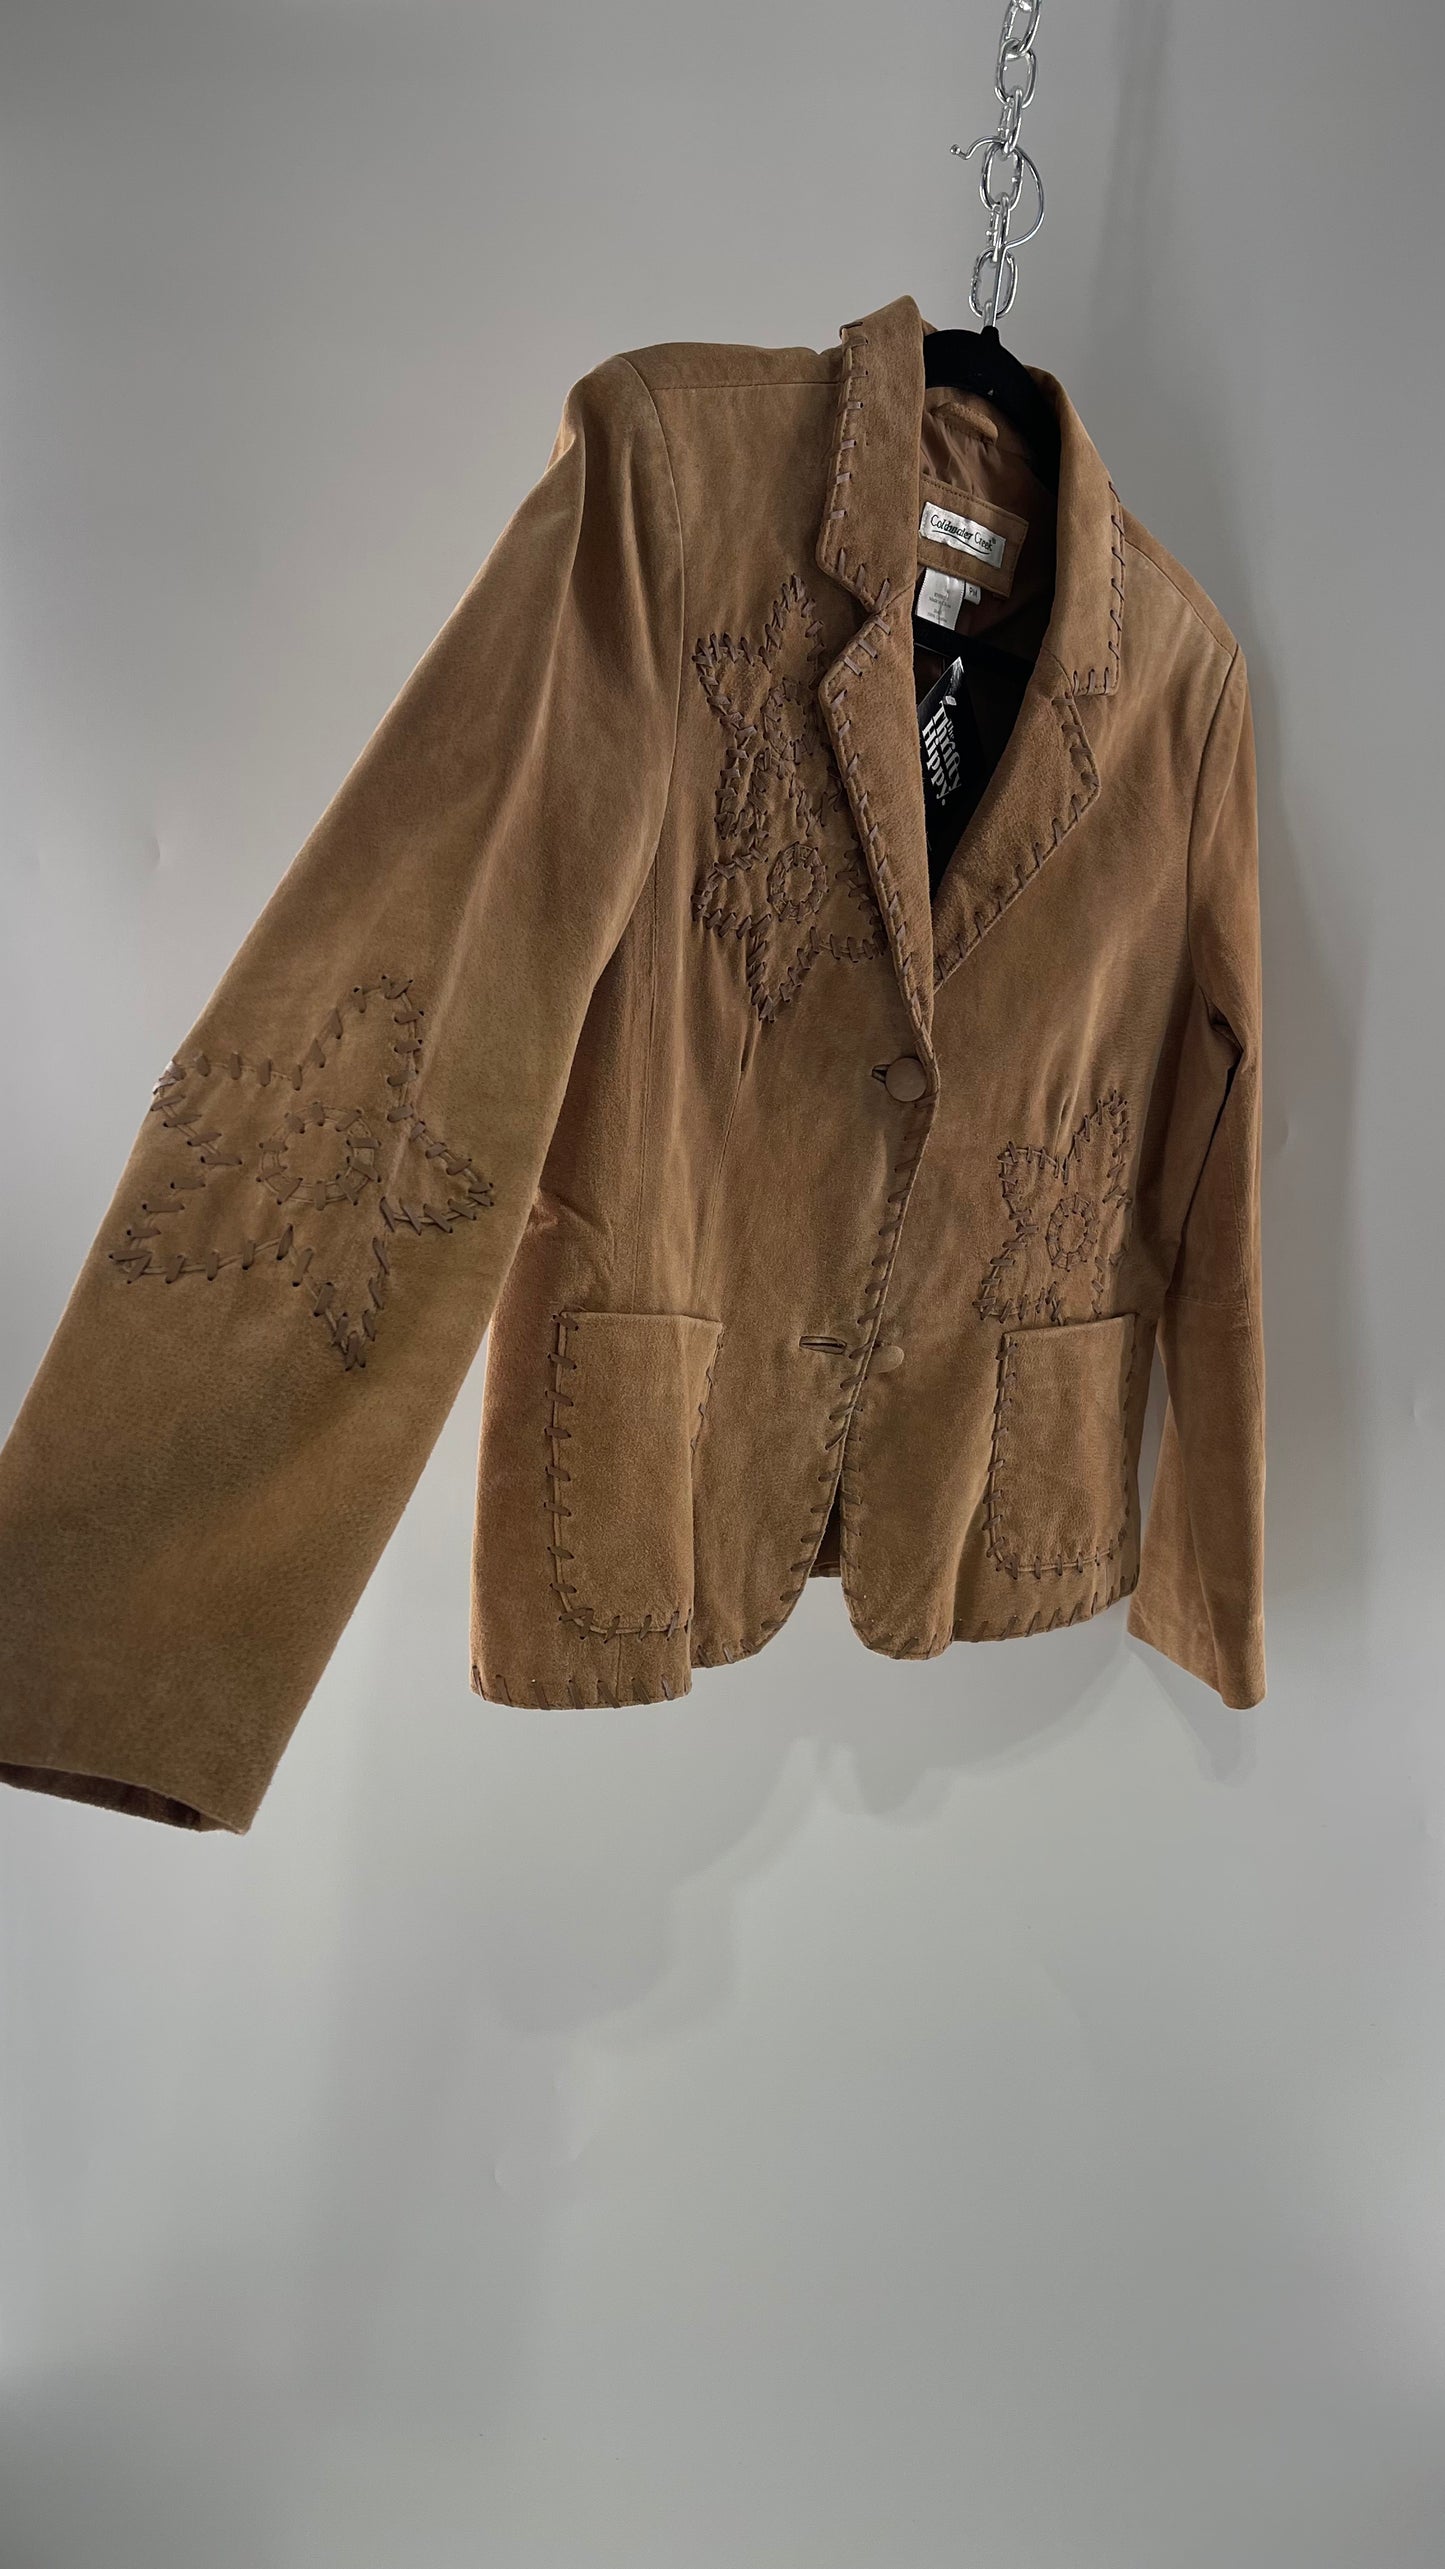 Vintage Rare Light Brown Genuine Suede Blazer with Embroidered Suede Flower and Contrasting Thick Leather Stitching (Medium)